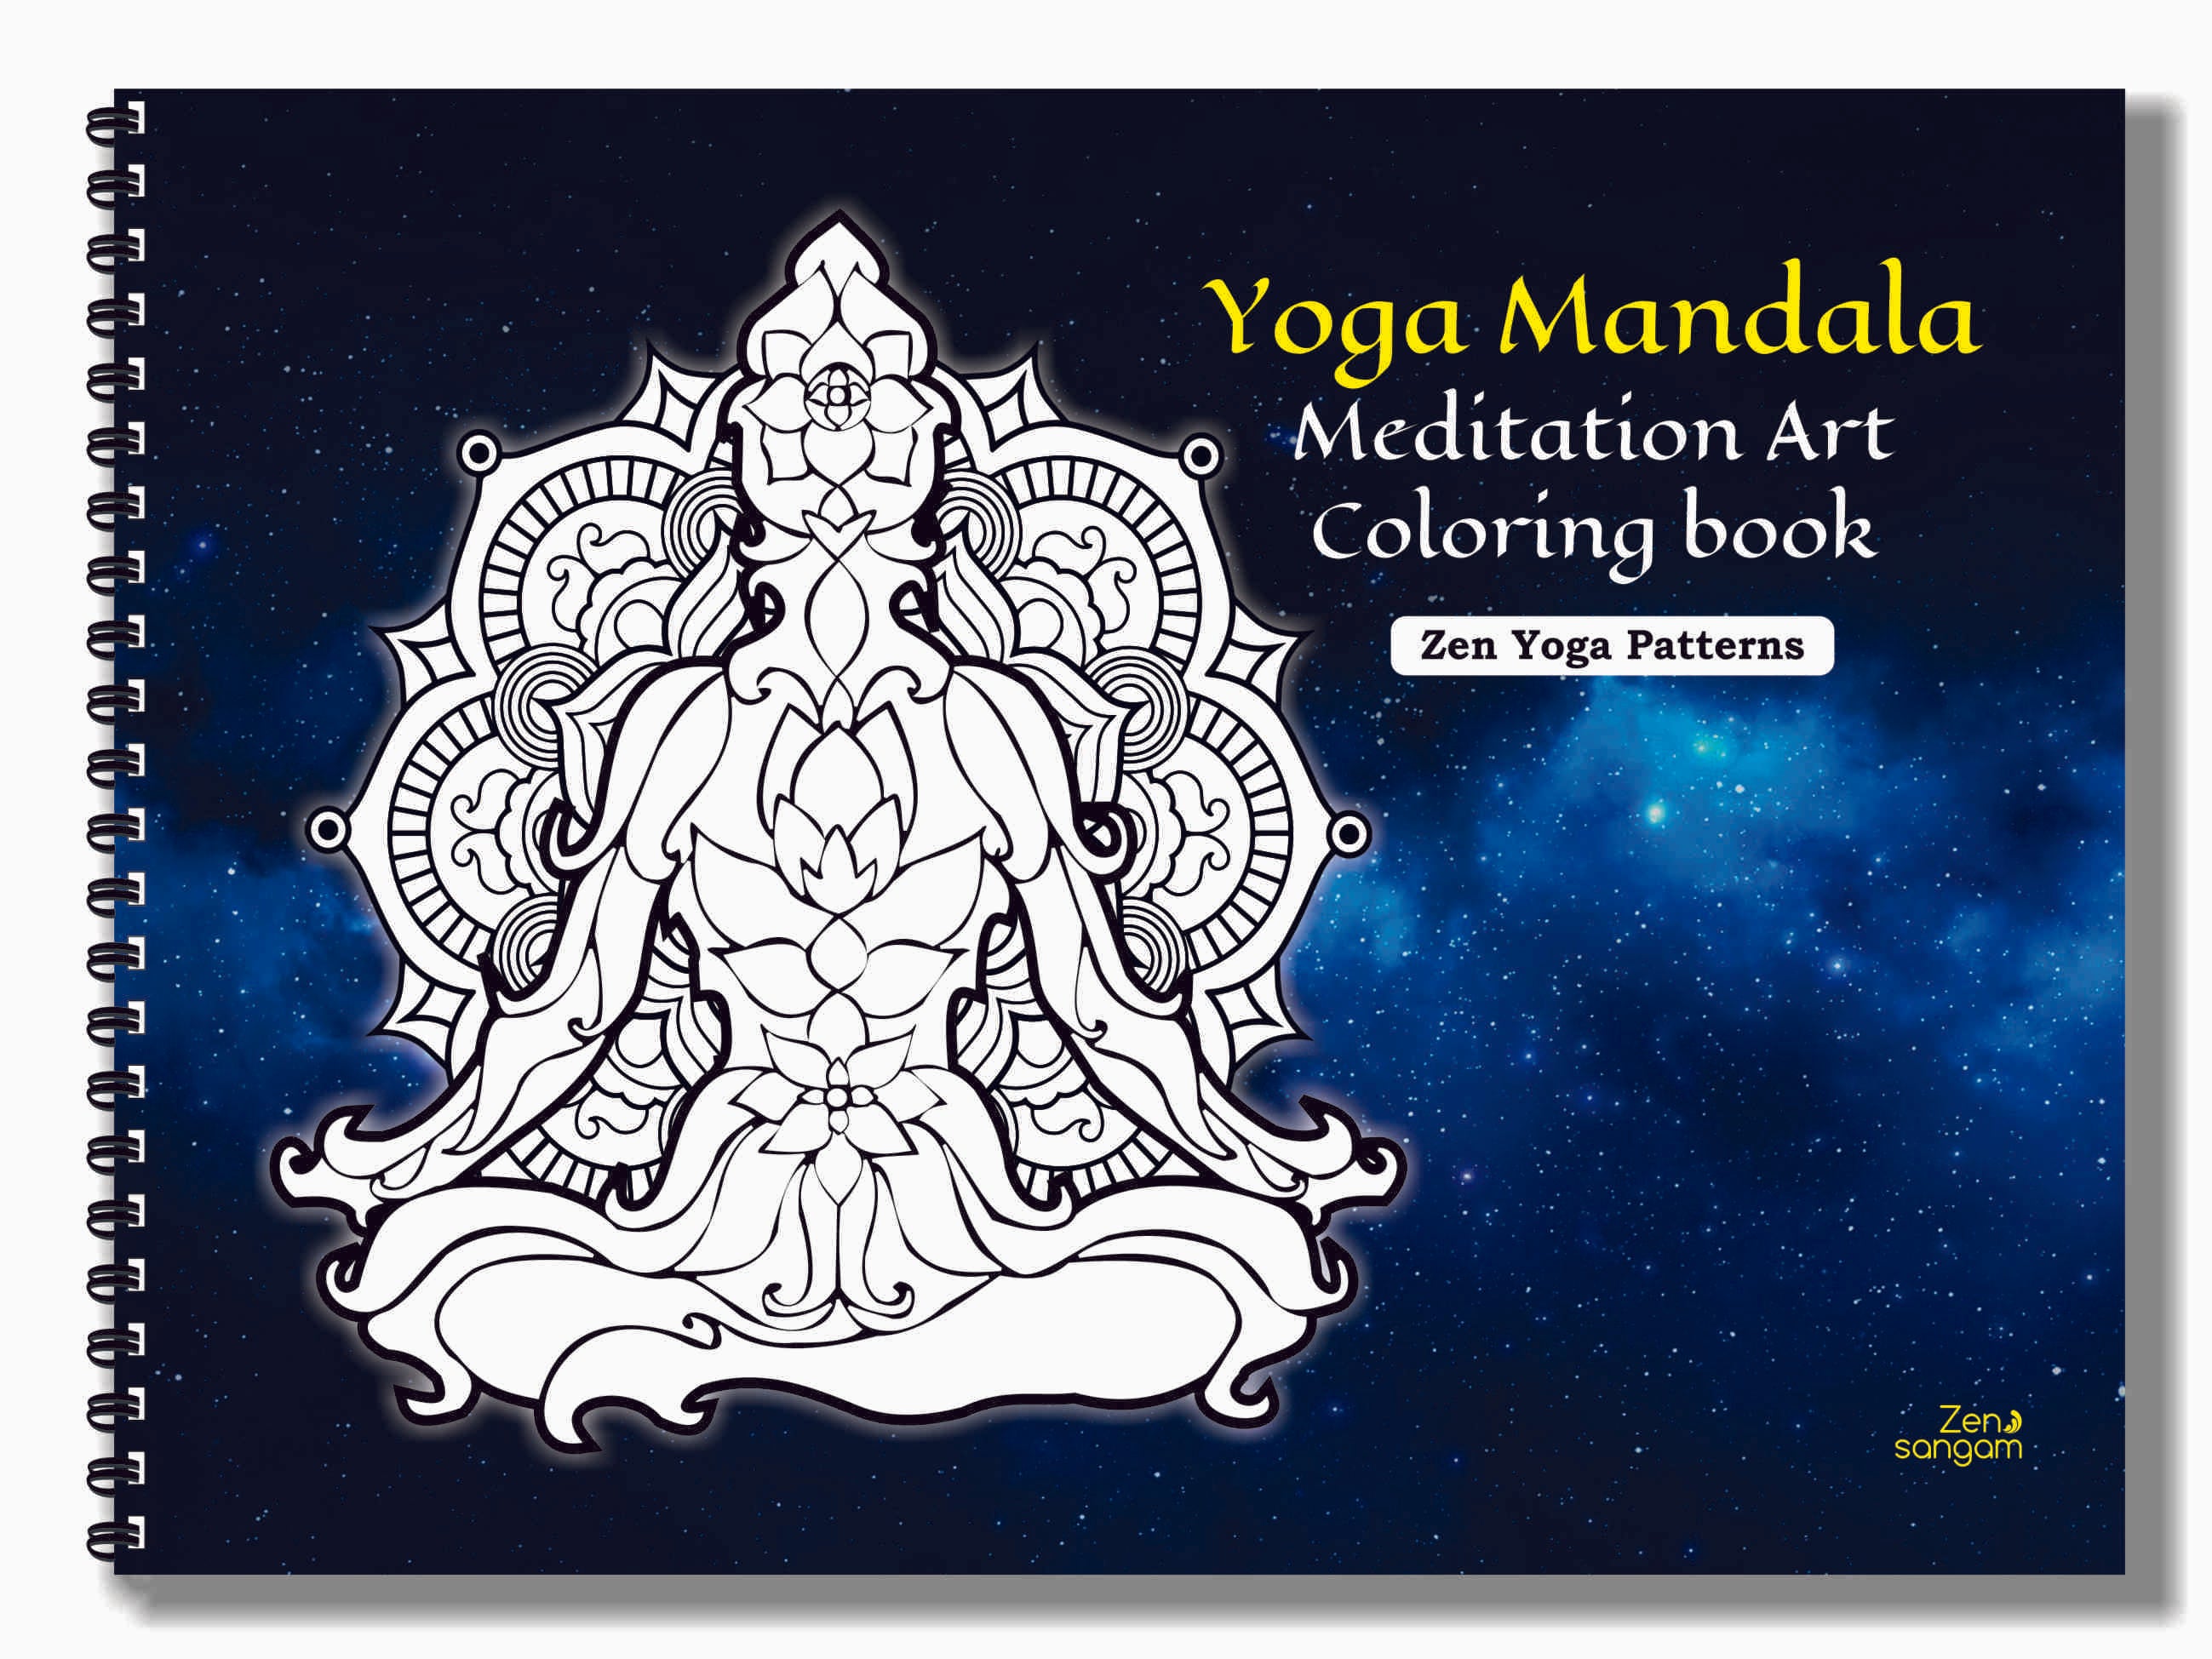 100 Mandalas Coloring Book For Adults: A Creative And Talented Love And Heart, Alien, Ancient Civilization, Animals, Decorative, Egyptian, Skull, Steampunk, Art Deco Mandala Coloring Books For Adults [Book]